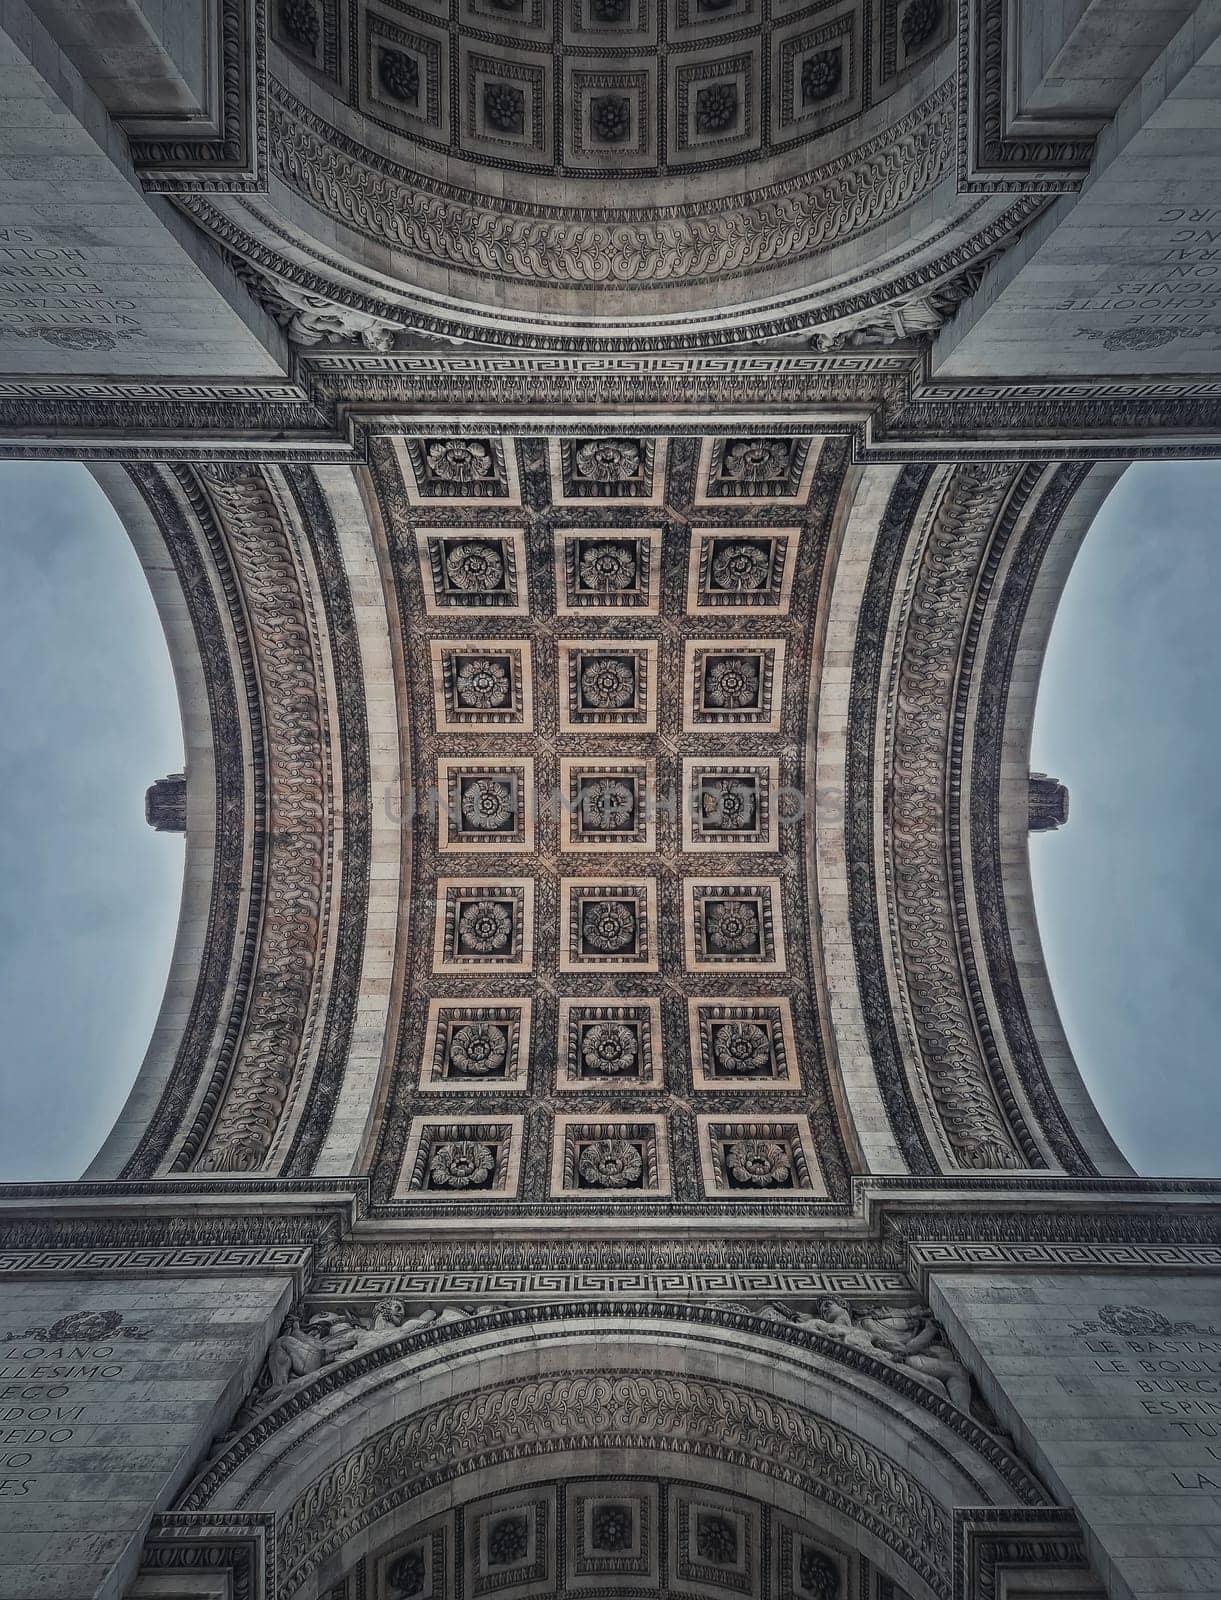 Closeup view underneath triumphal Arch, in Paris, France. Architectural details and ceiling ornate pattern of the famous Arc de triomphe landmark	 by psychoshadow